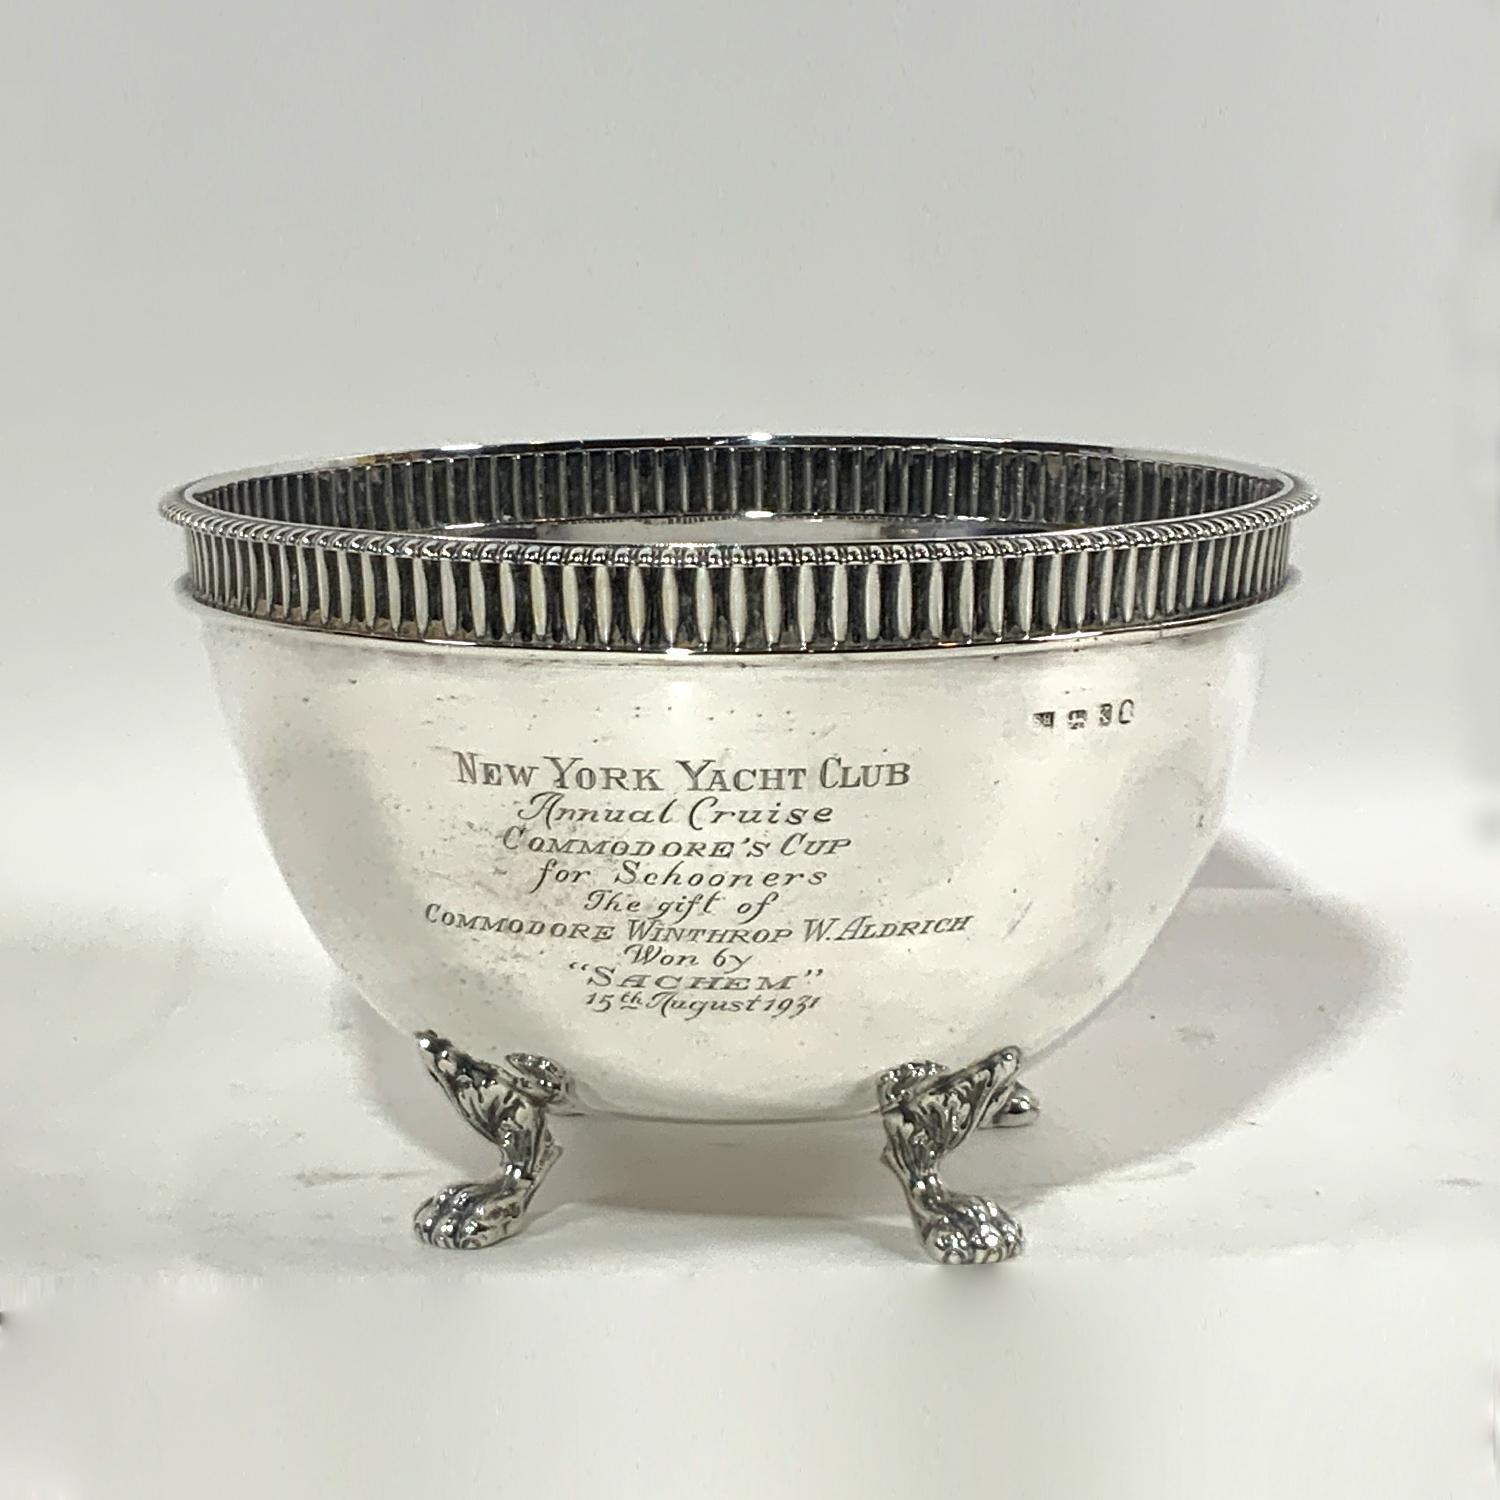 Rare 1931 New York Yacht Club trophy.
Engraved: 
New York Yacht Club
Annual Cruise
Commodores Cup For Schooners
The gift of Winthrop W. Aldrich won by Sachem 15th August 1931. Pierced with four hallmarks.